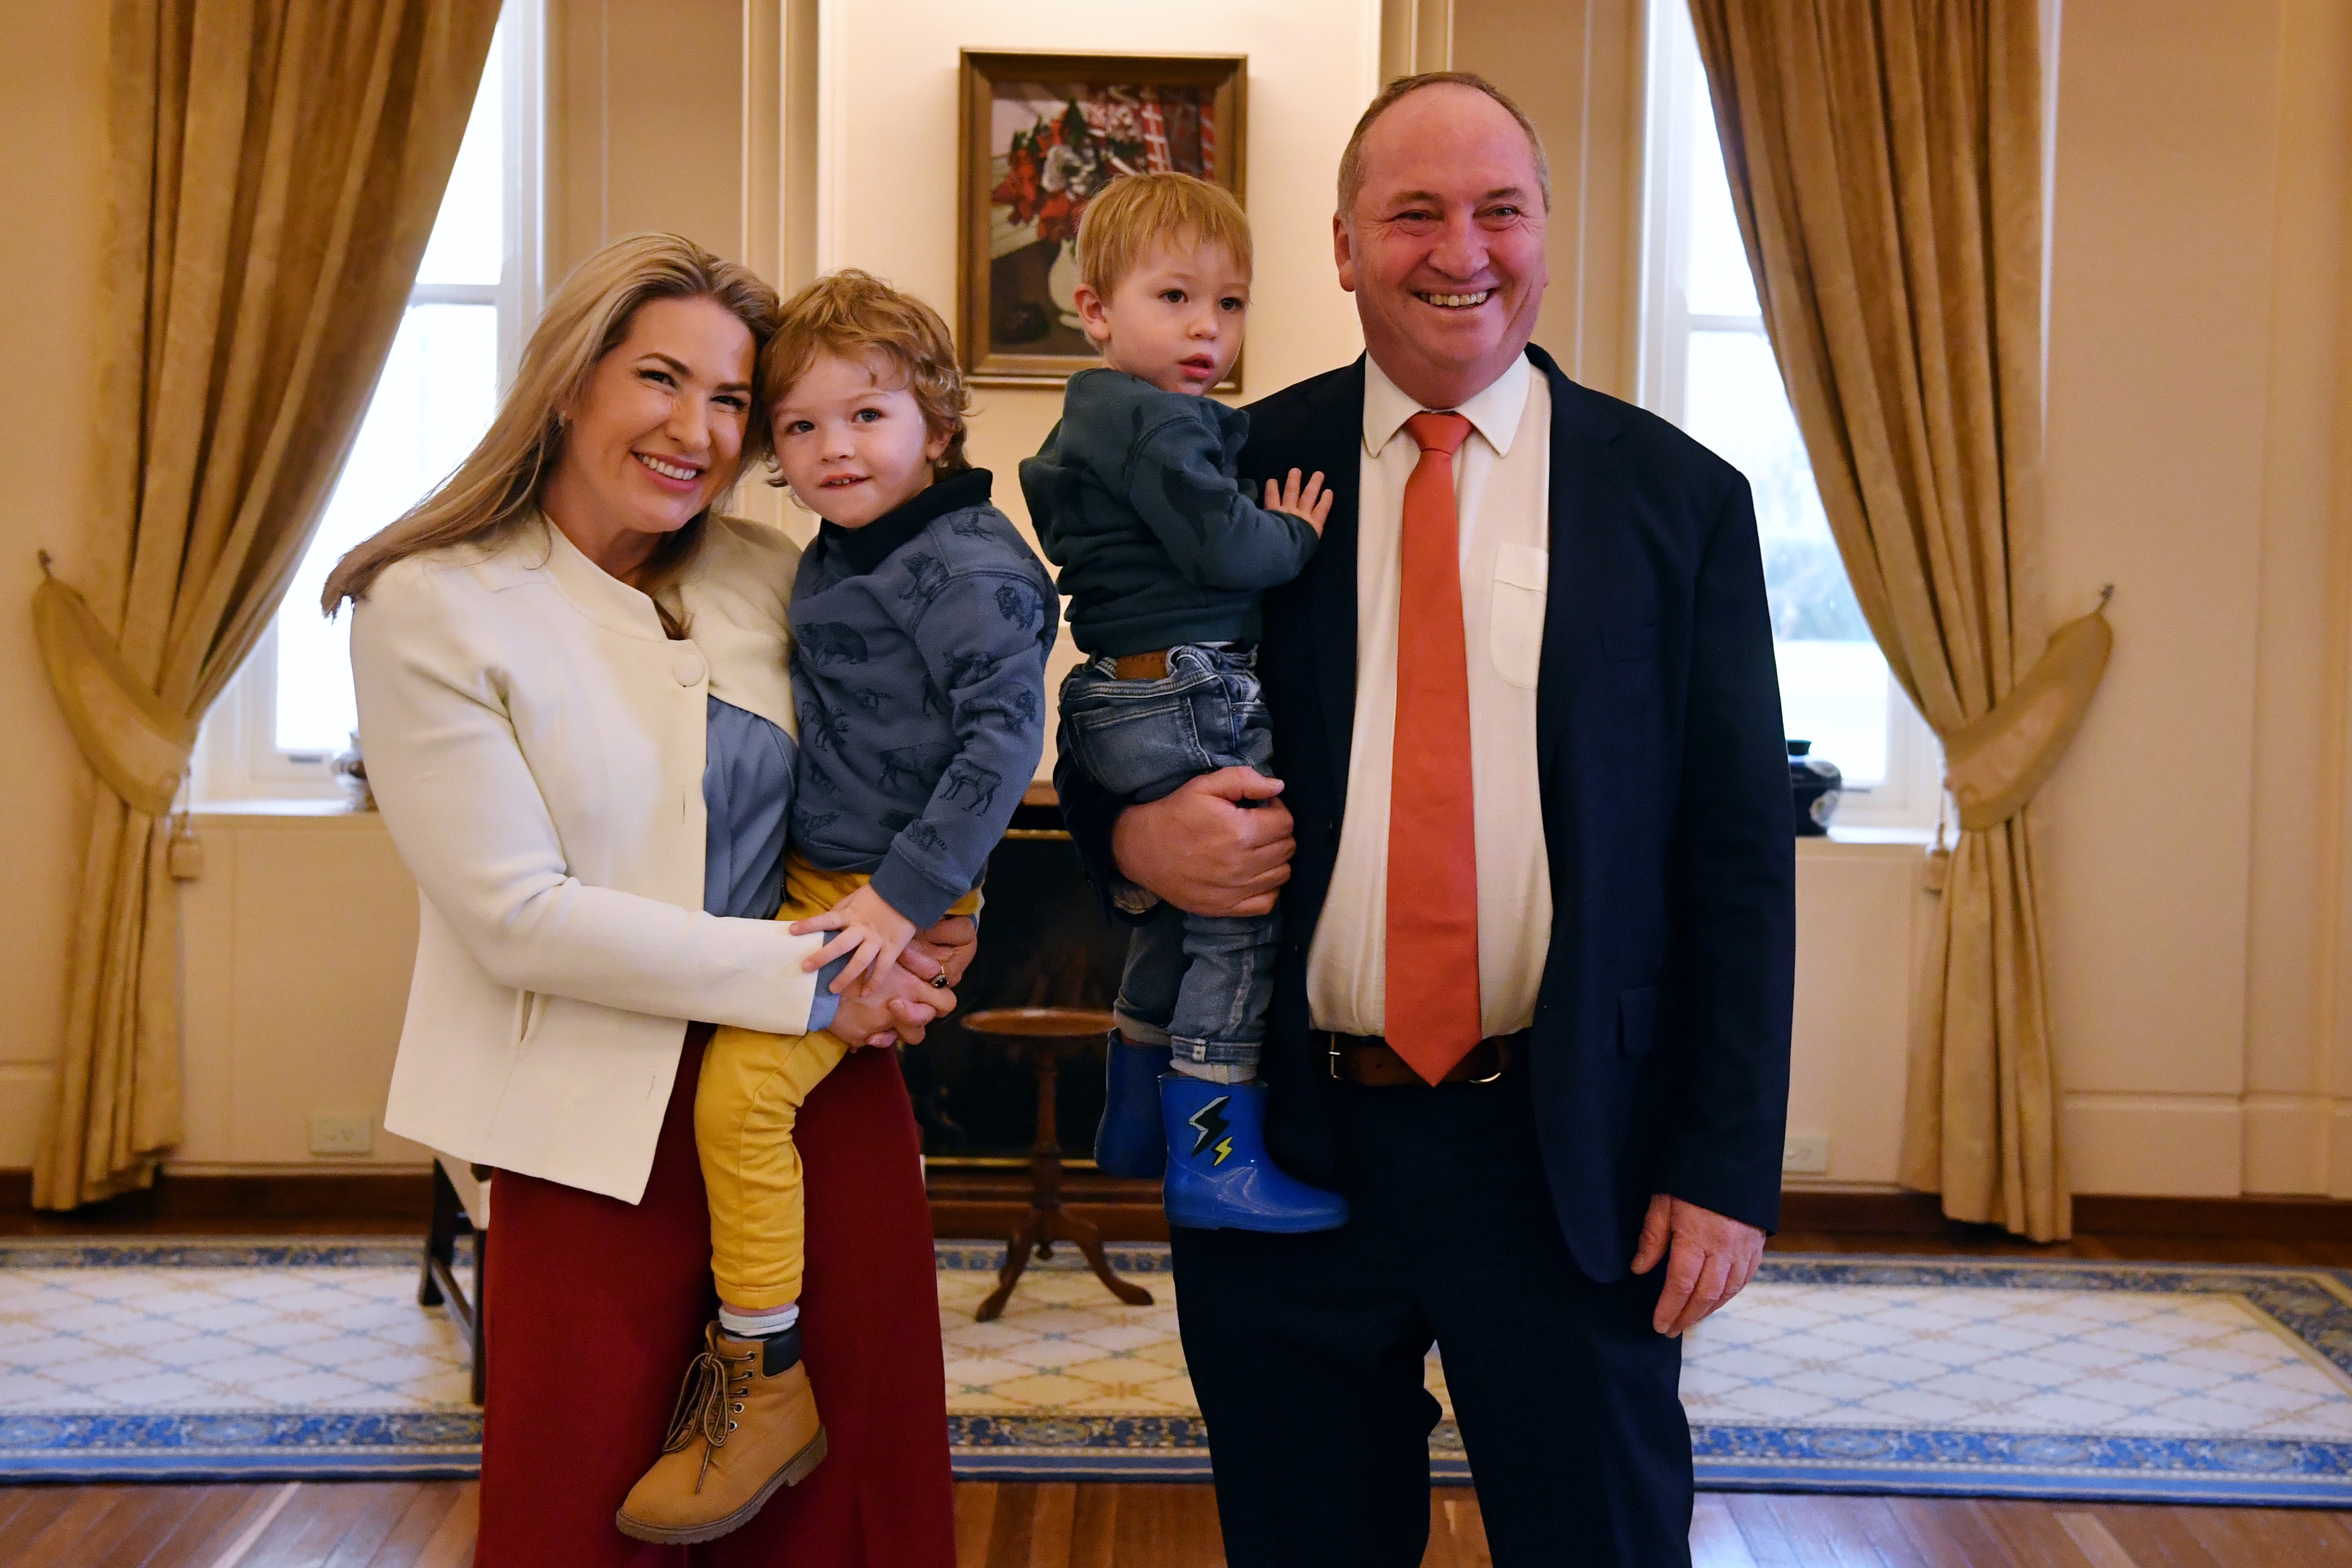 Re-elected Leader of the Nationals Barnaby Joyce poses for a photograph with partner Vikki Campion and sons Sebastian and Thomas.